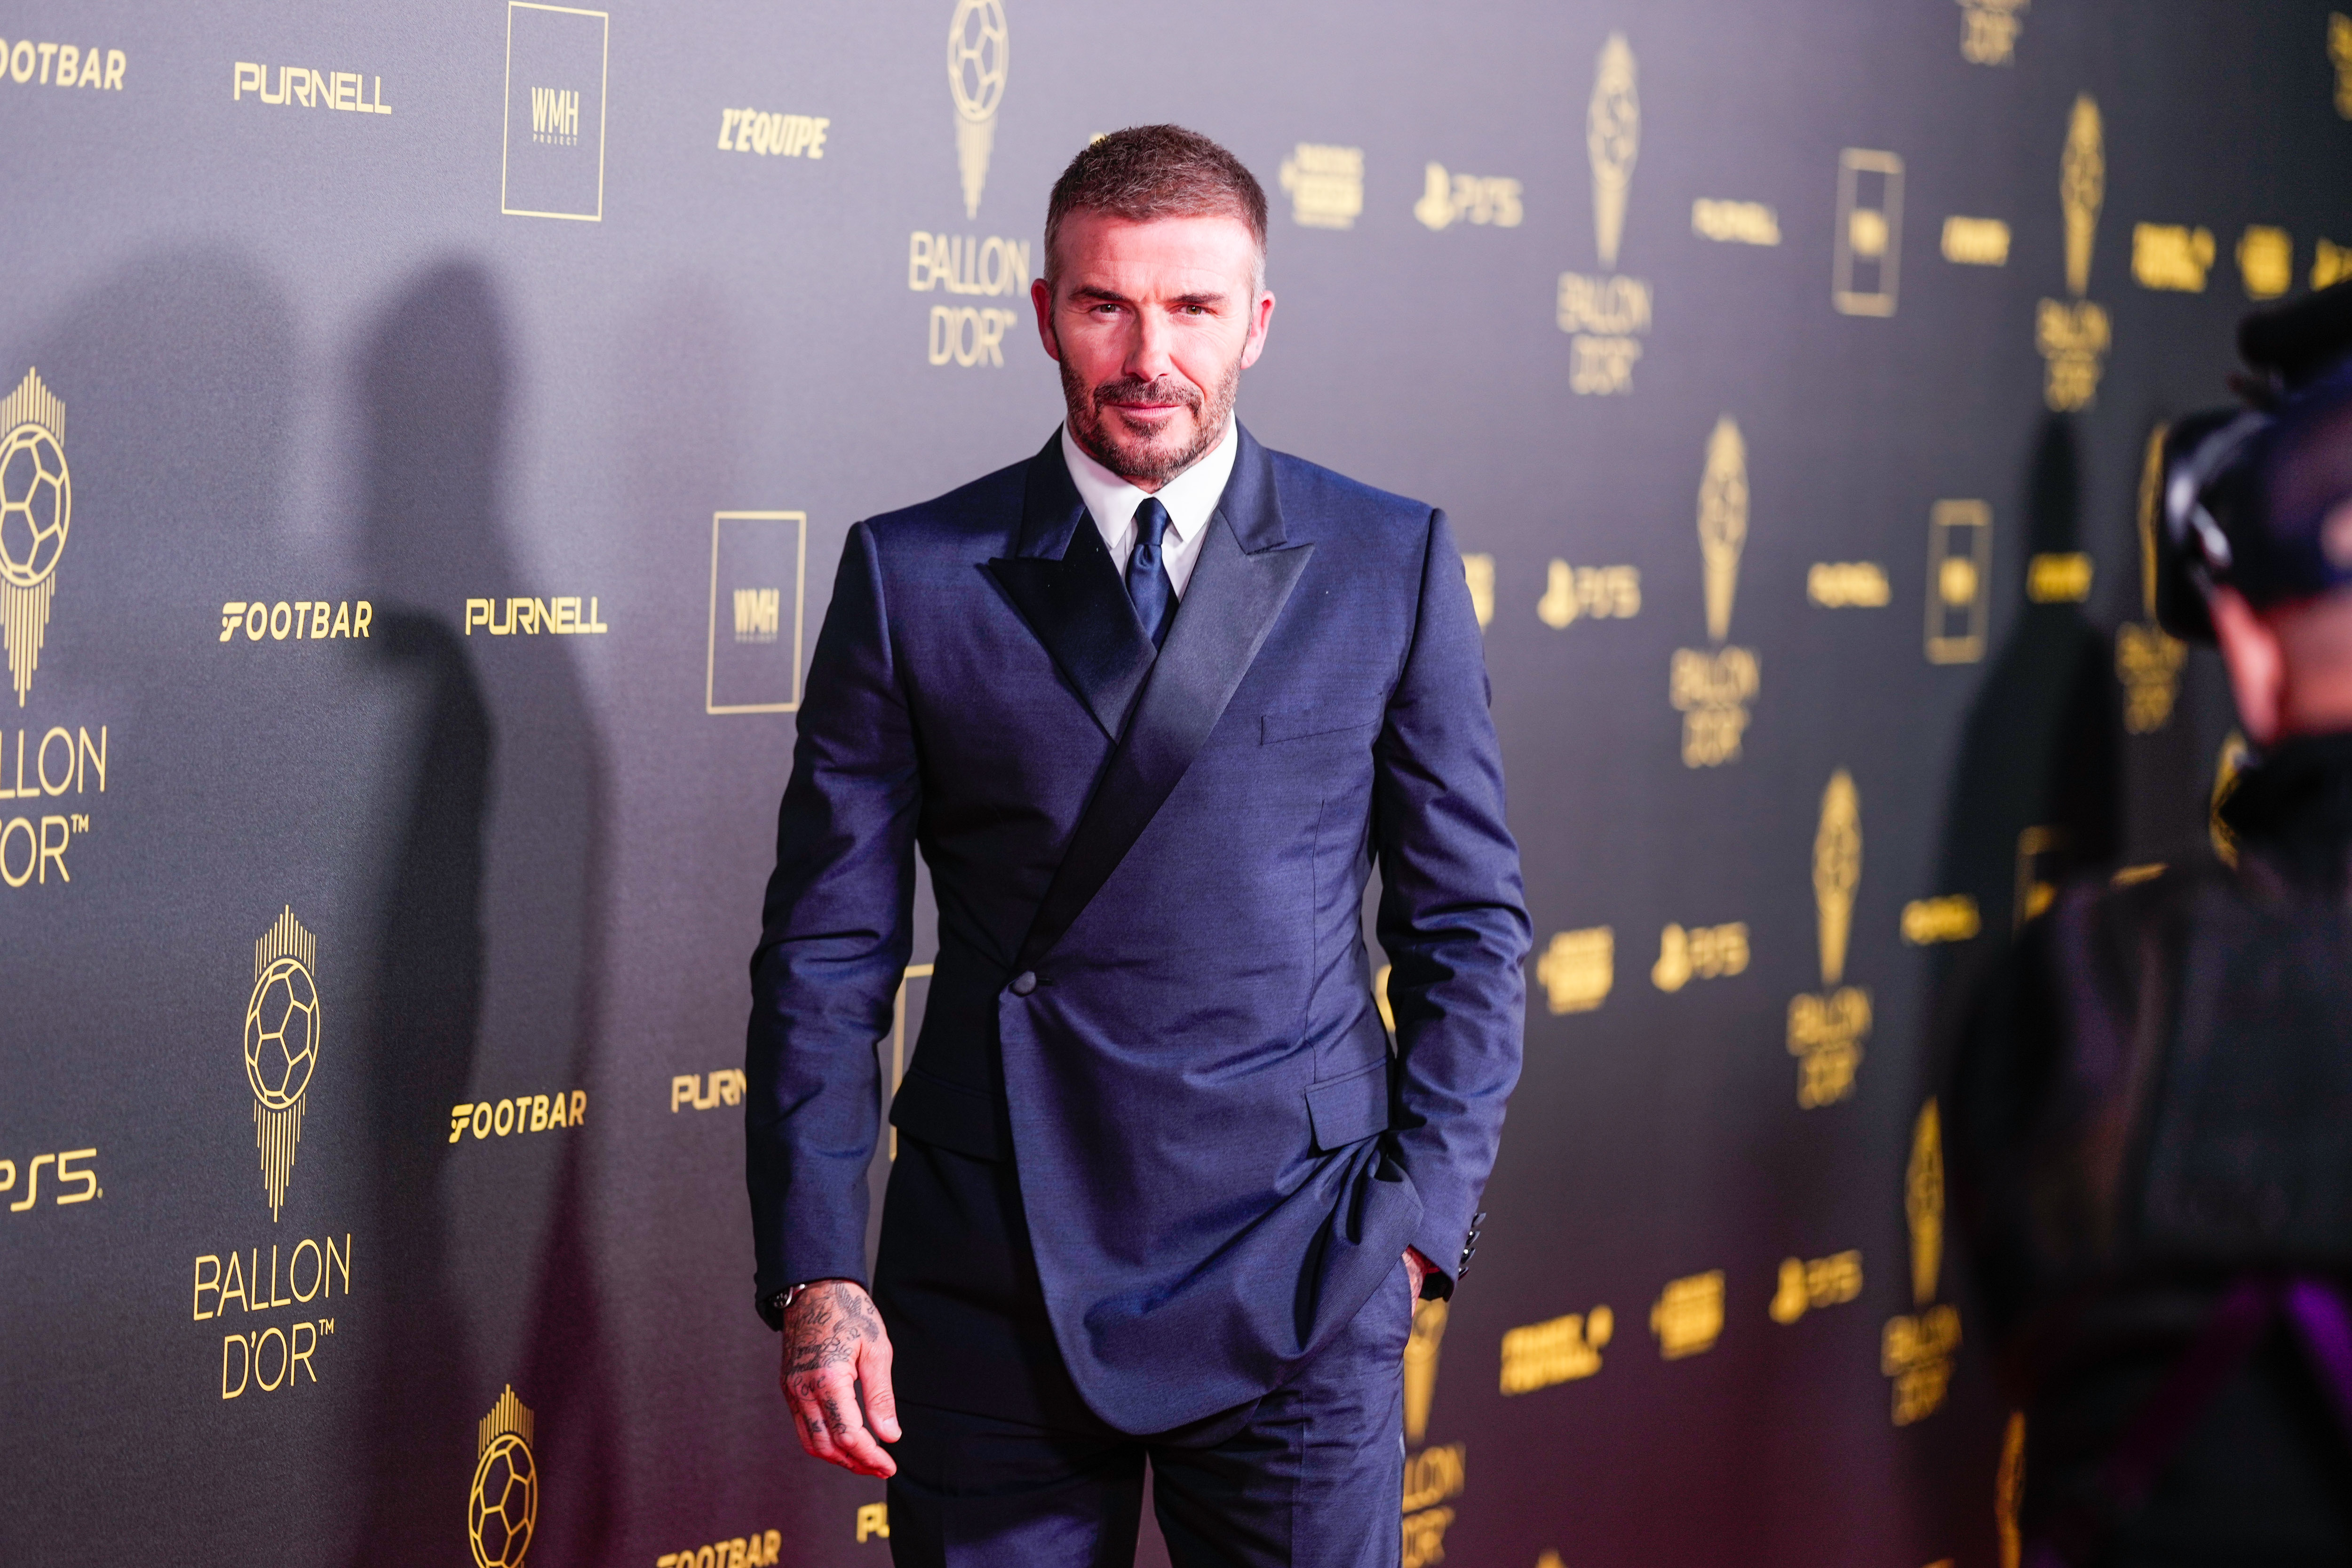 David Beckham at the Ballon d'Or 2023 ceremony on October 30, 2023 in Paris, France. | Source: Getty Images